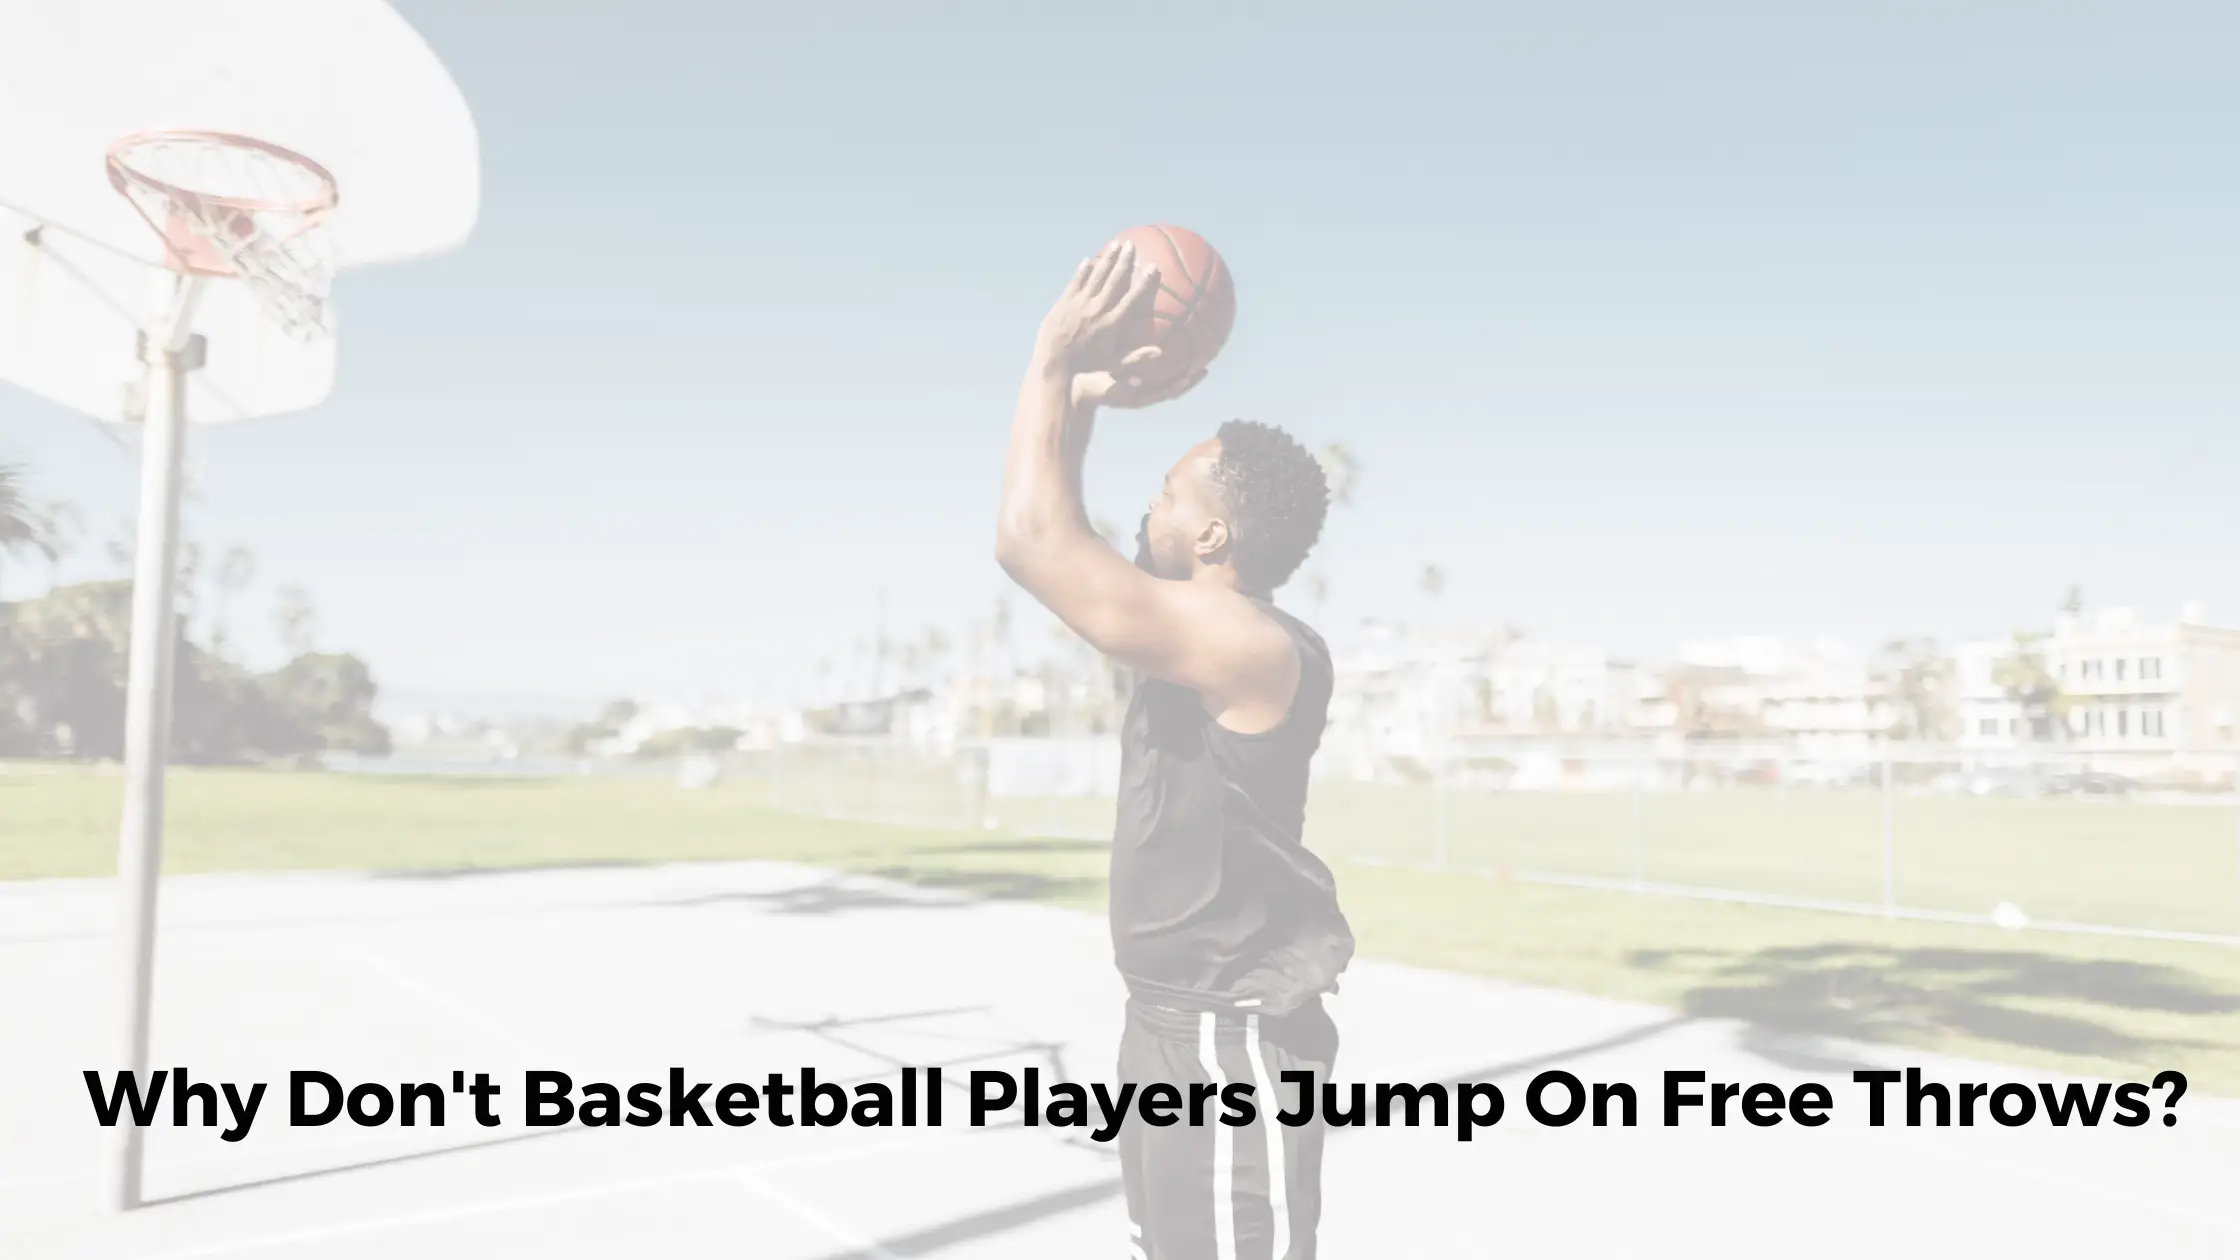 Why Don’t Basketball Players Jump On Free Throws?